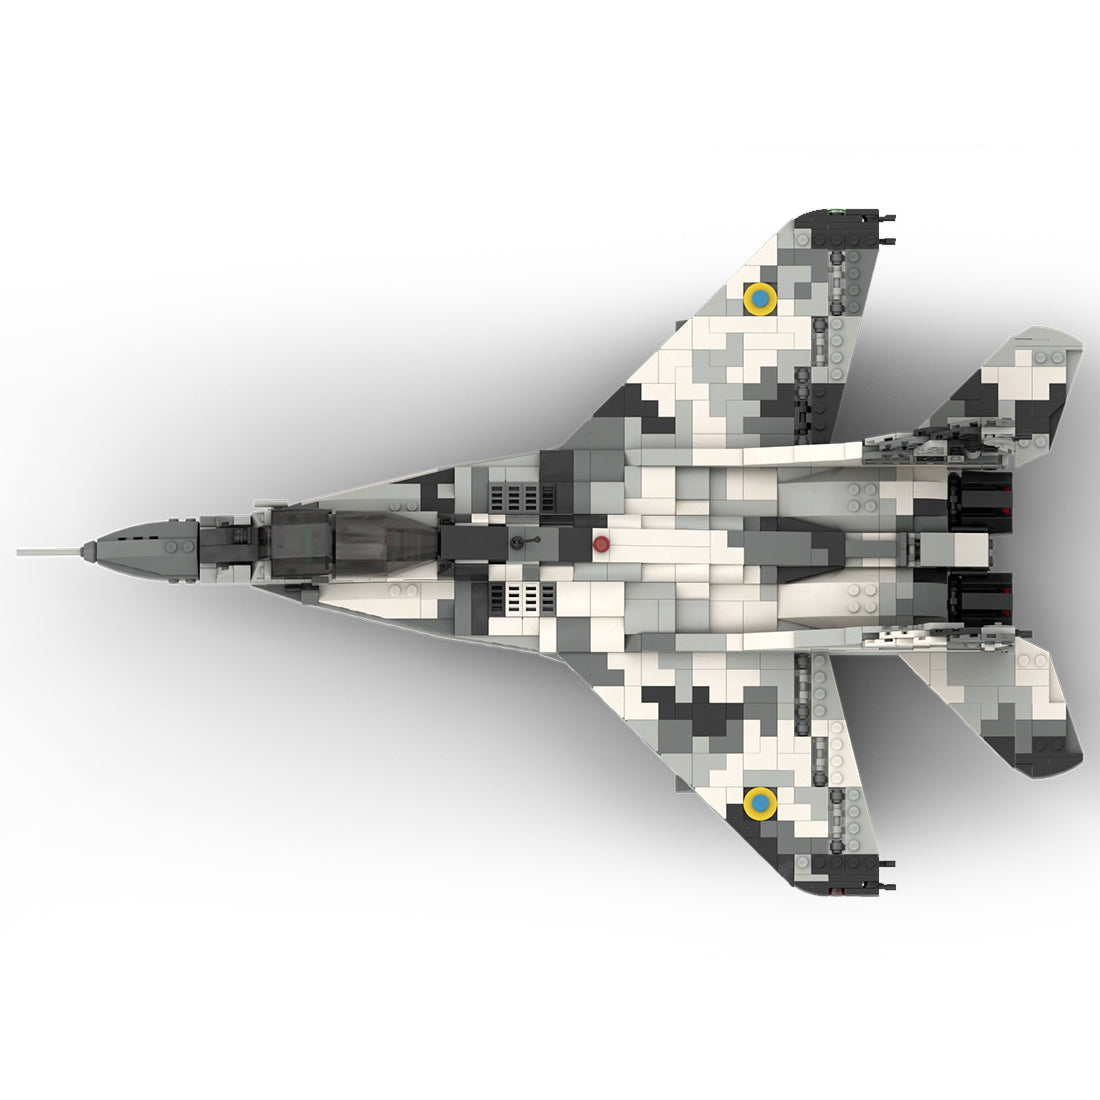 MOC-106680 Mig-29 "The Ghost of Kyiv"